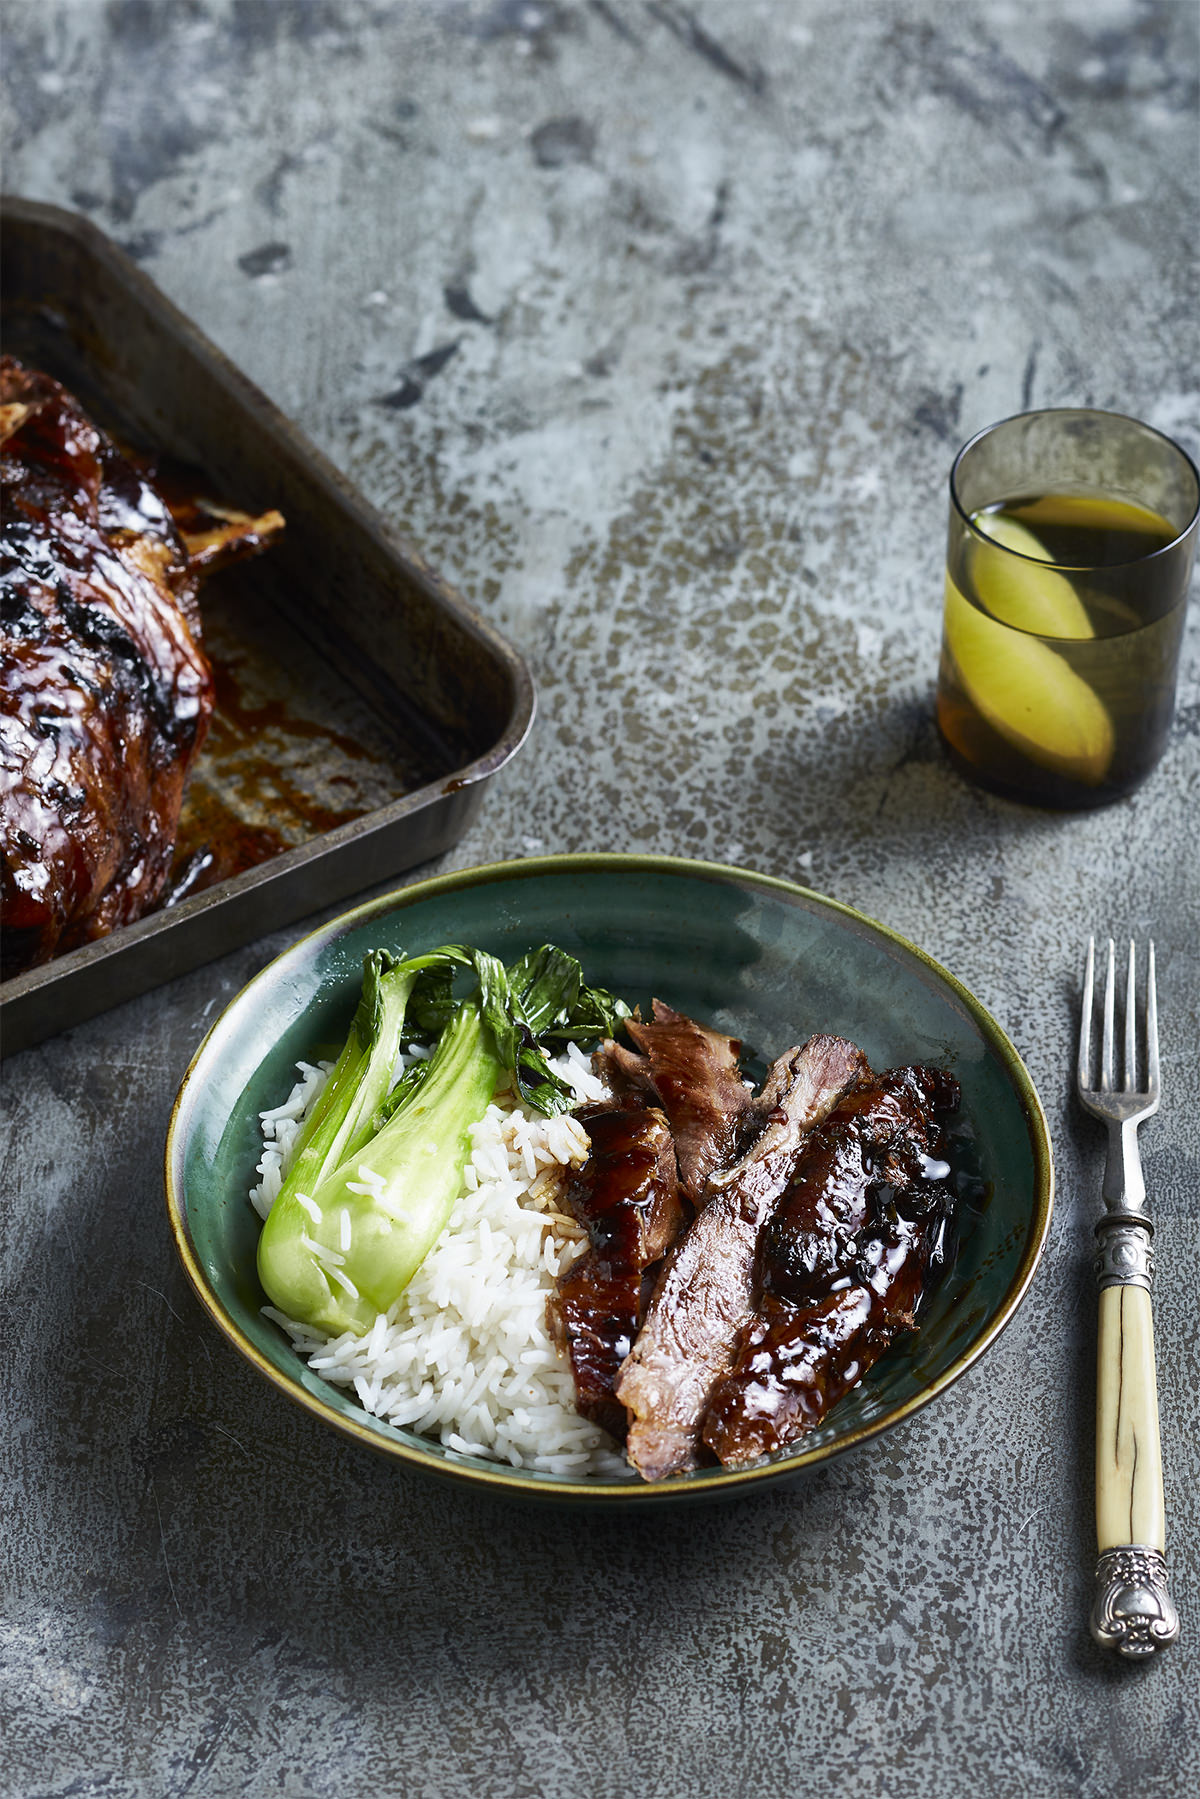 Slow roasted lamb shoulder – different versions of the classic roast keep weekends interesting.